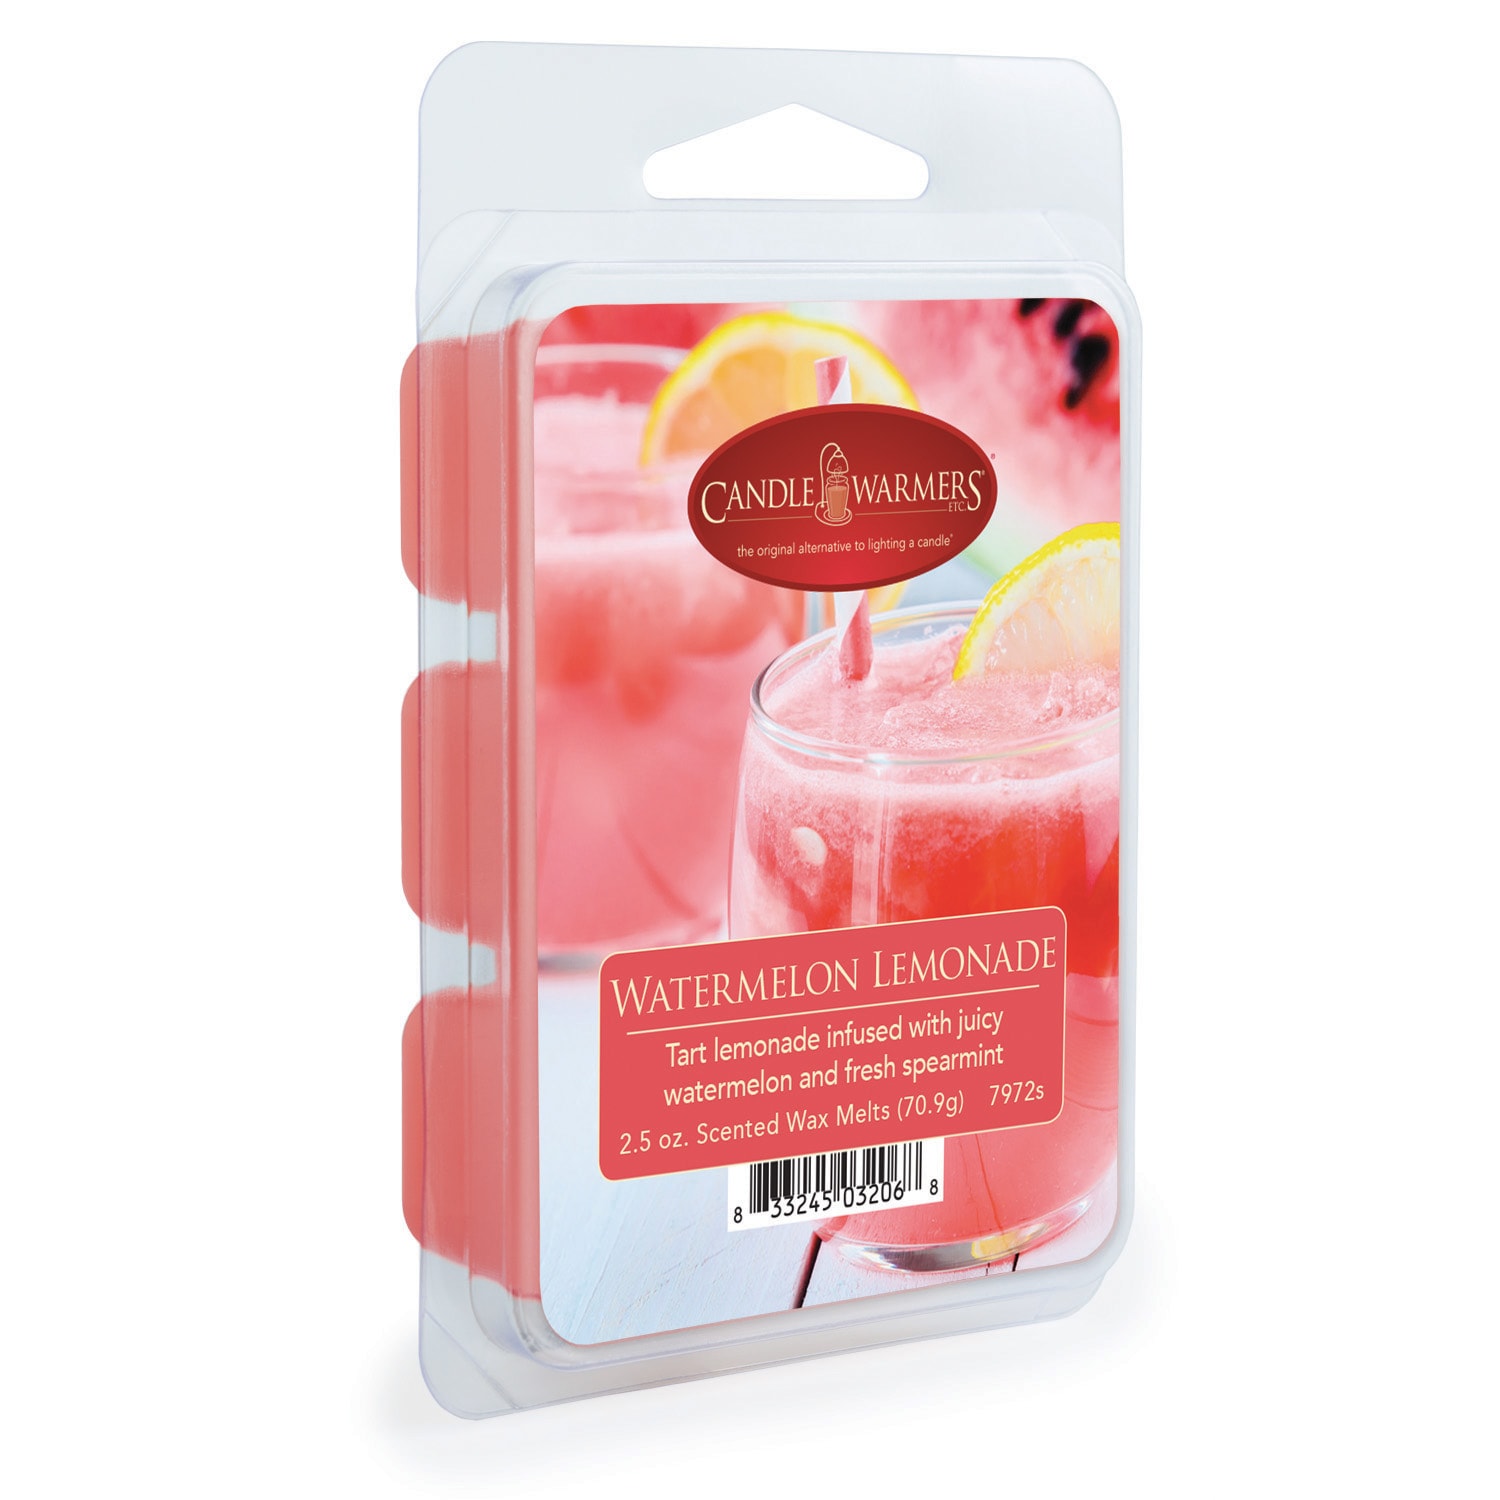 Candle Warmers Etc Watermelon Lemonade Wax Melts - Fruit Scented Soy Blend  with High Fragrance Load in the Wax Melts & Warmers department at